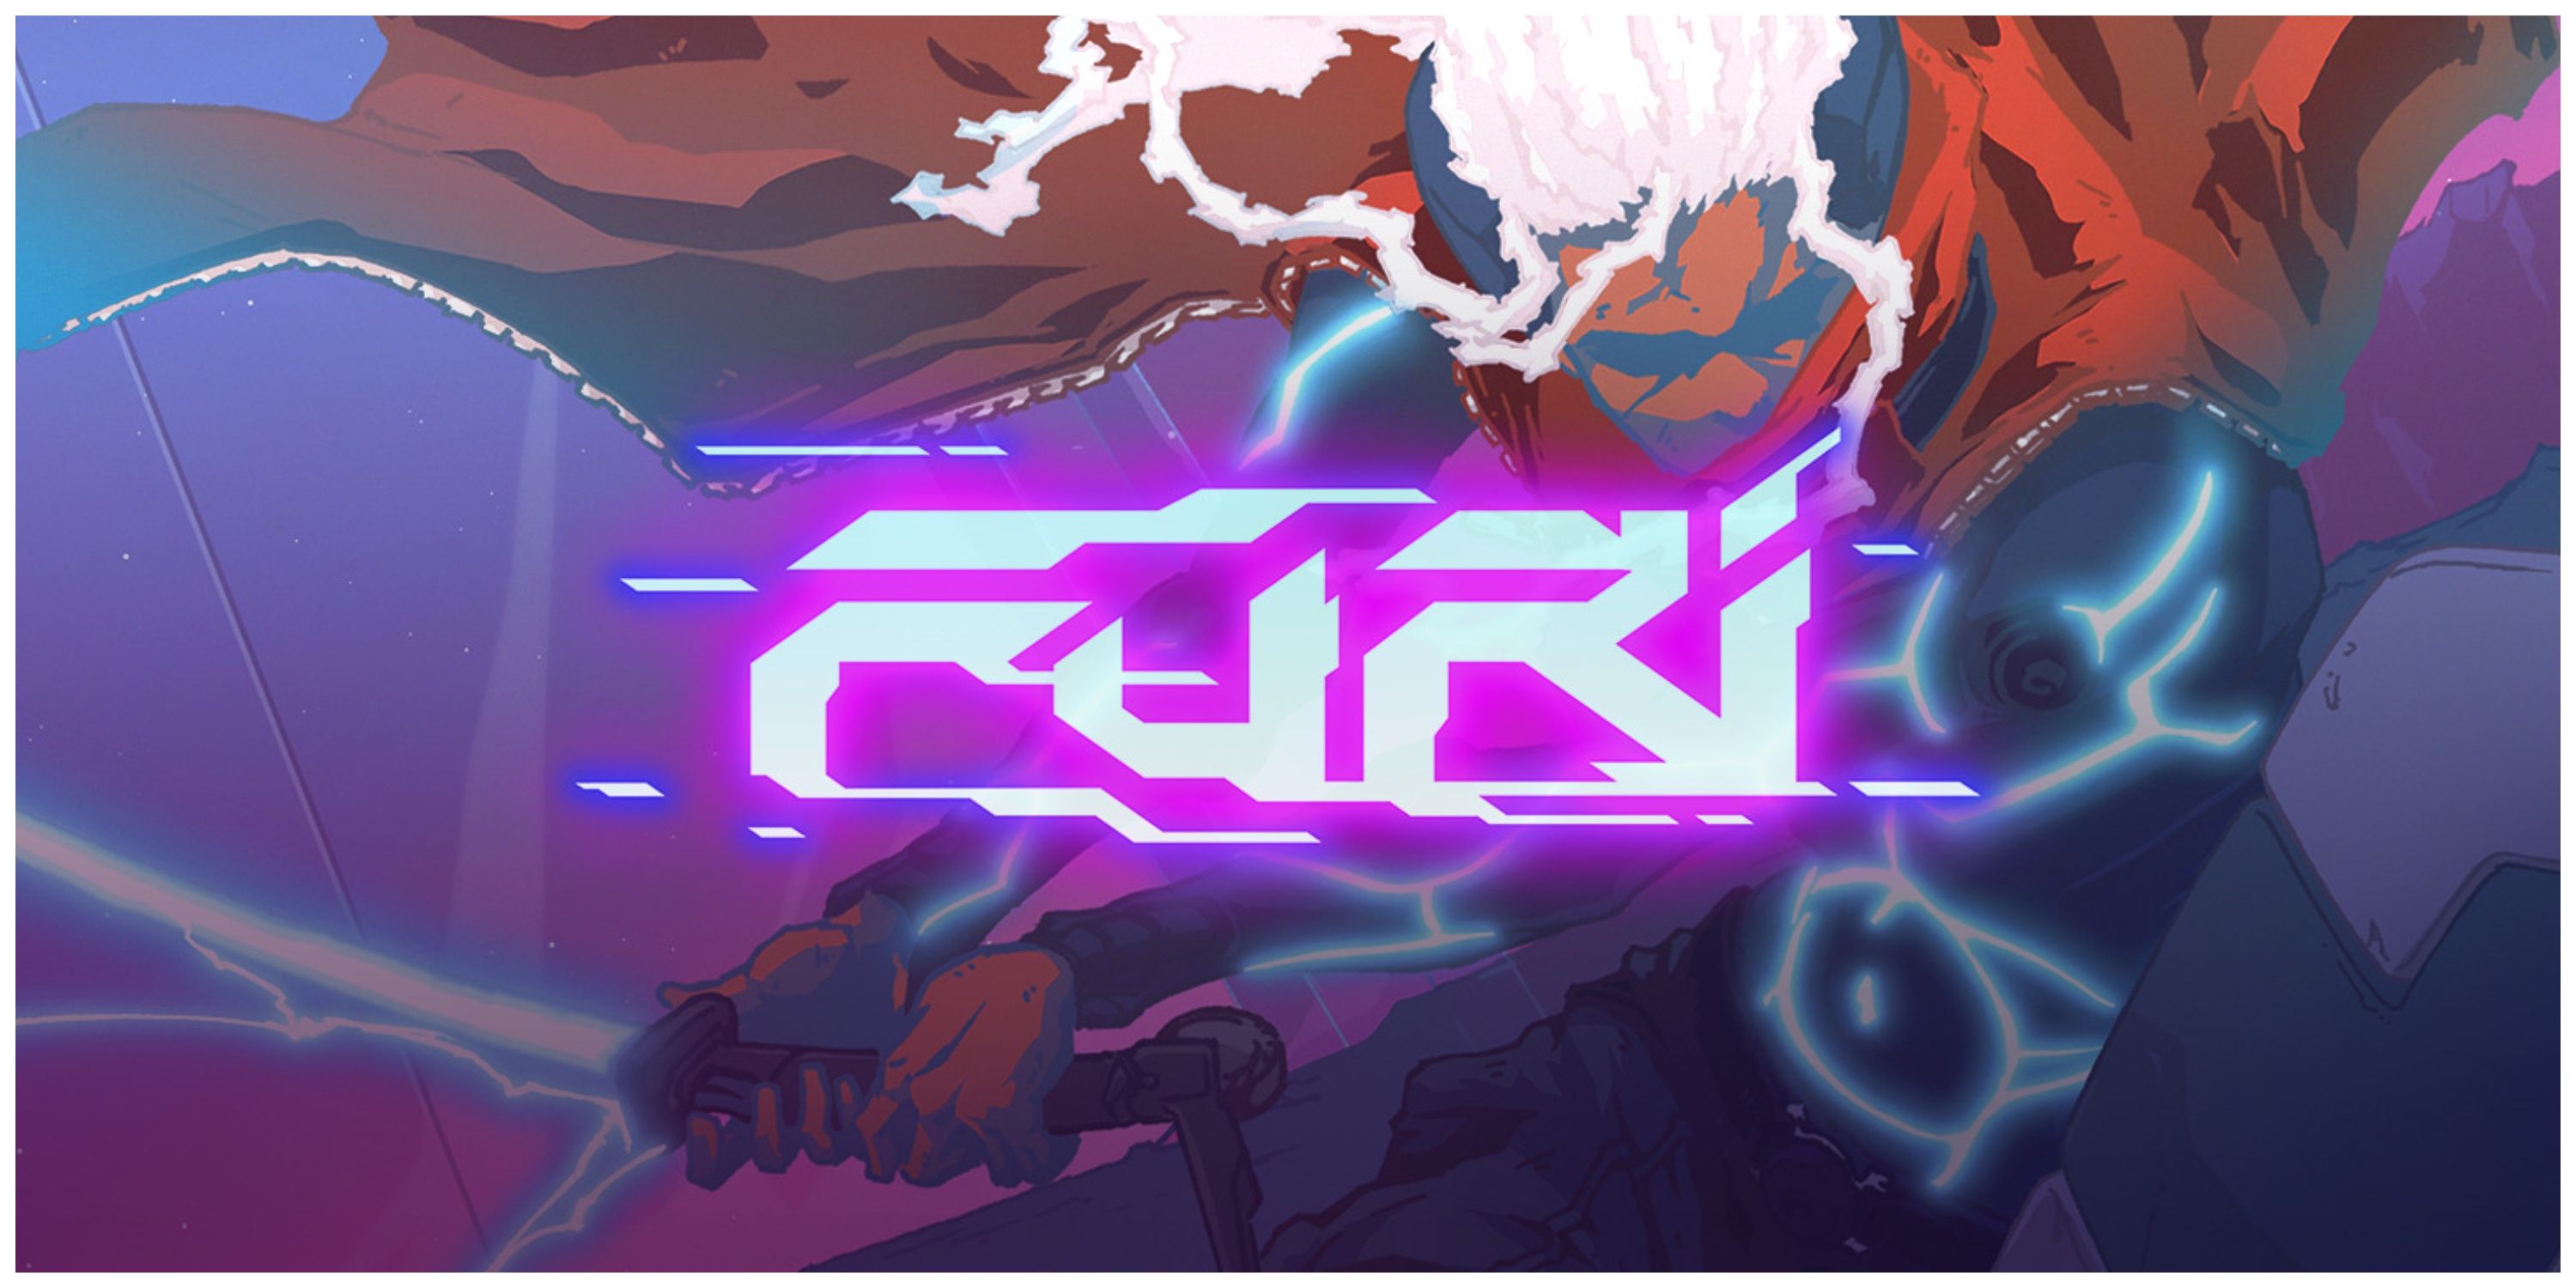 The title art for Furi